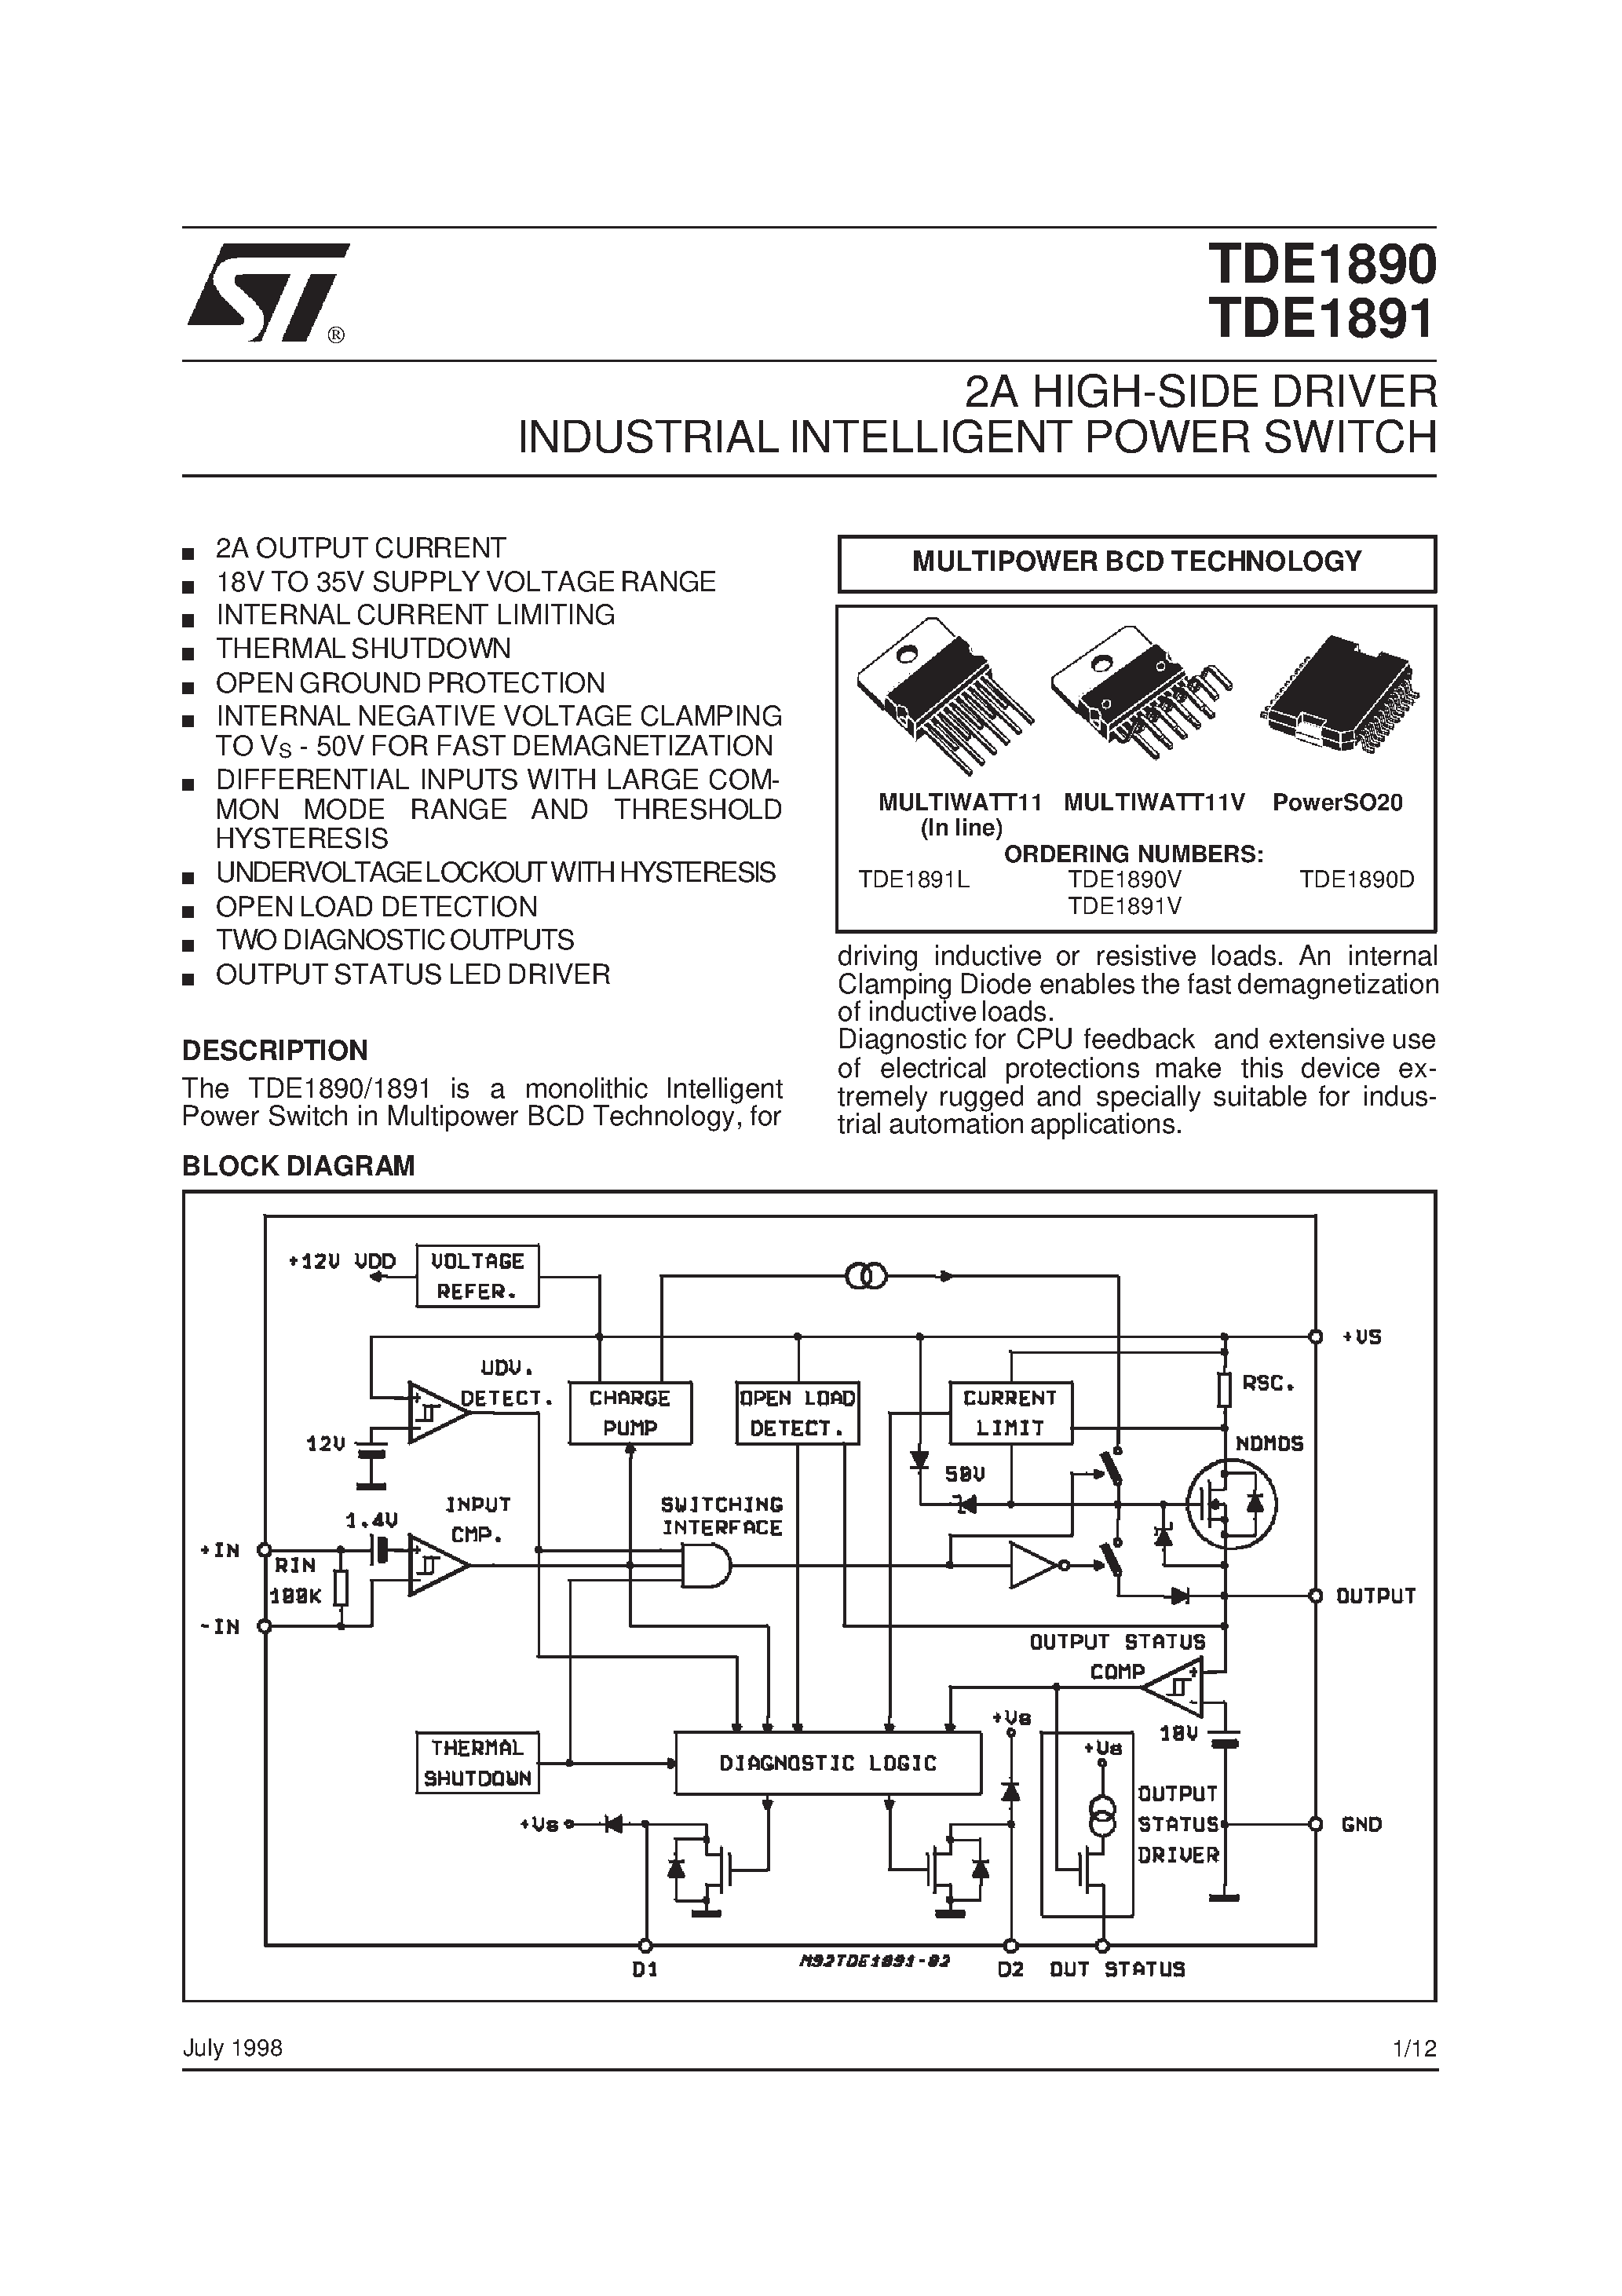 Datasheet TDE1891 - 2A HIGH-SIDE DRIVER INDUSTRIAL INTELLIGENT POWER SWITCH page 1